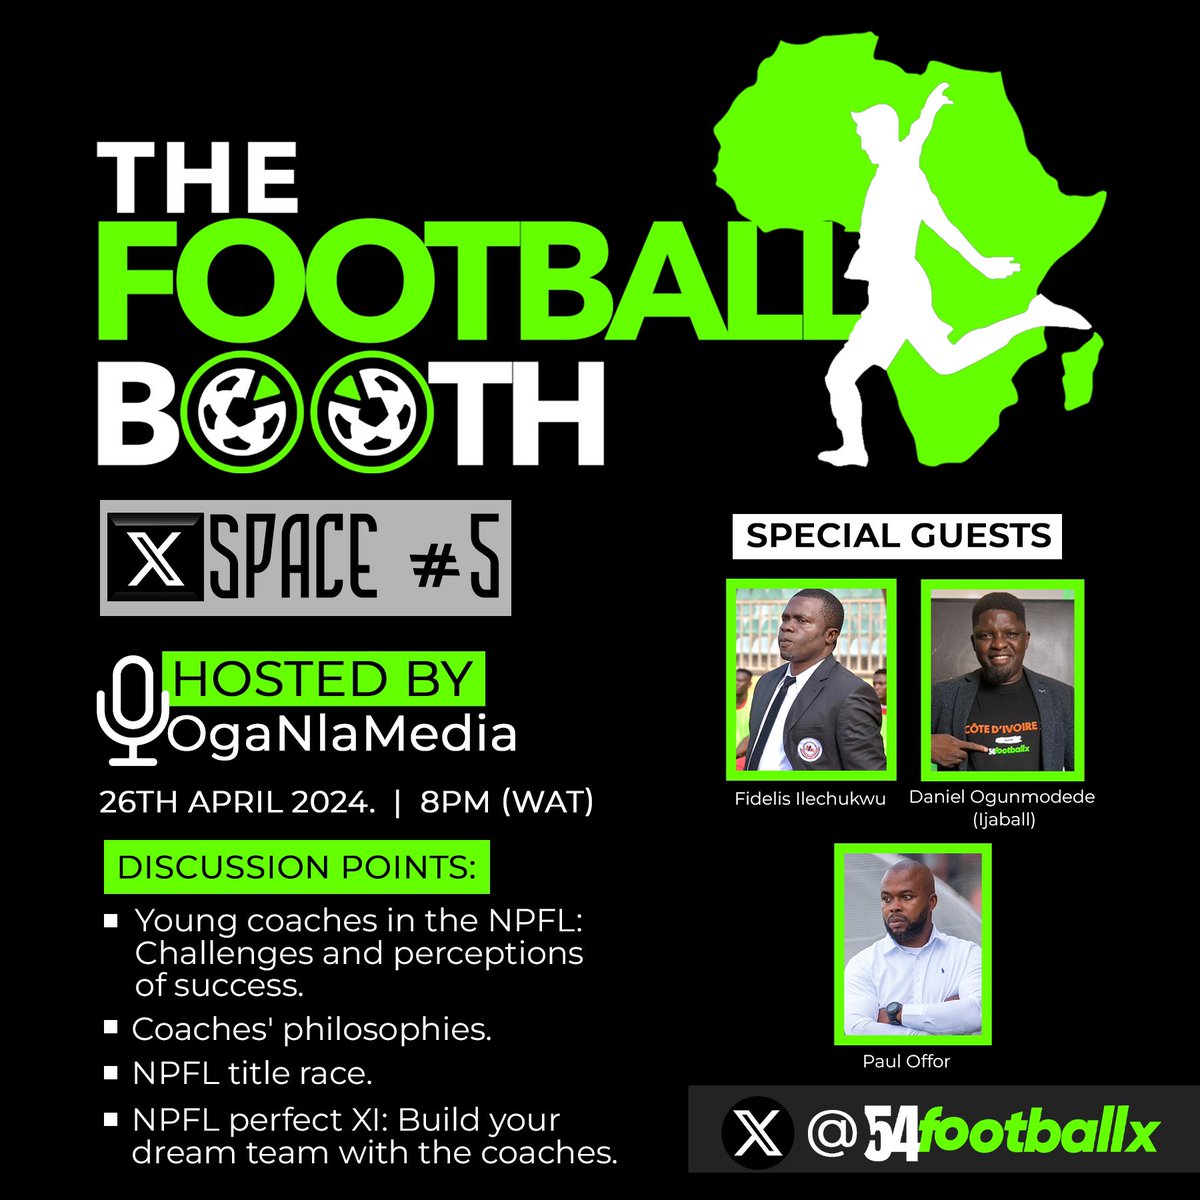 The Football Booth is back!! 🚨 In this month’s edition of the 54footballx booth on X, we have 3 special guest who are 3 of the brightest minds in the #NPFL24 coaching space Coal Paul Offor, Daniel Ogunmodede and Fidelis Ilechukwu. Date: Tomorrow Friday, 26th April Time:…